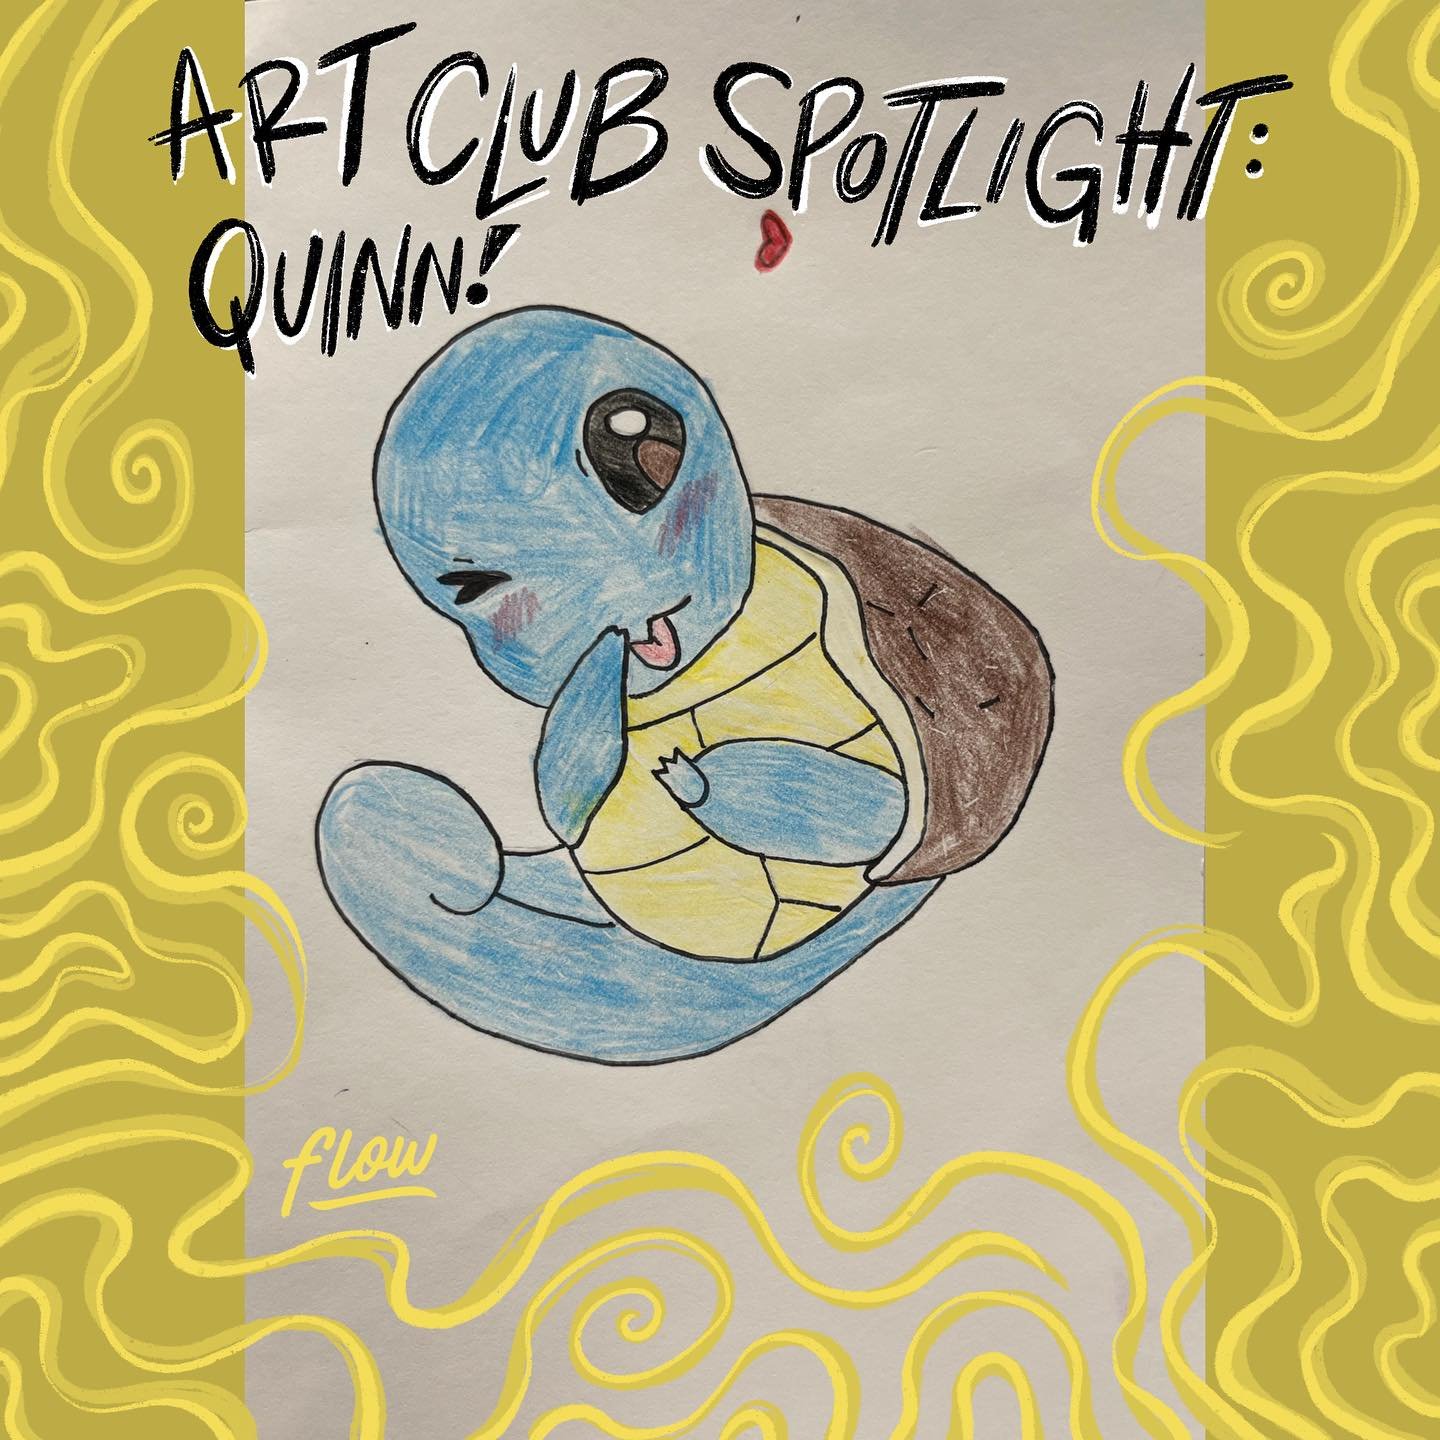 This week on Art club&rsquo;s spotlight we have an adorable Pok&eacute;mon drawing by Quinn! #flowlovesyou